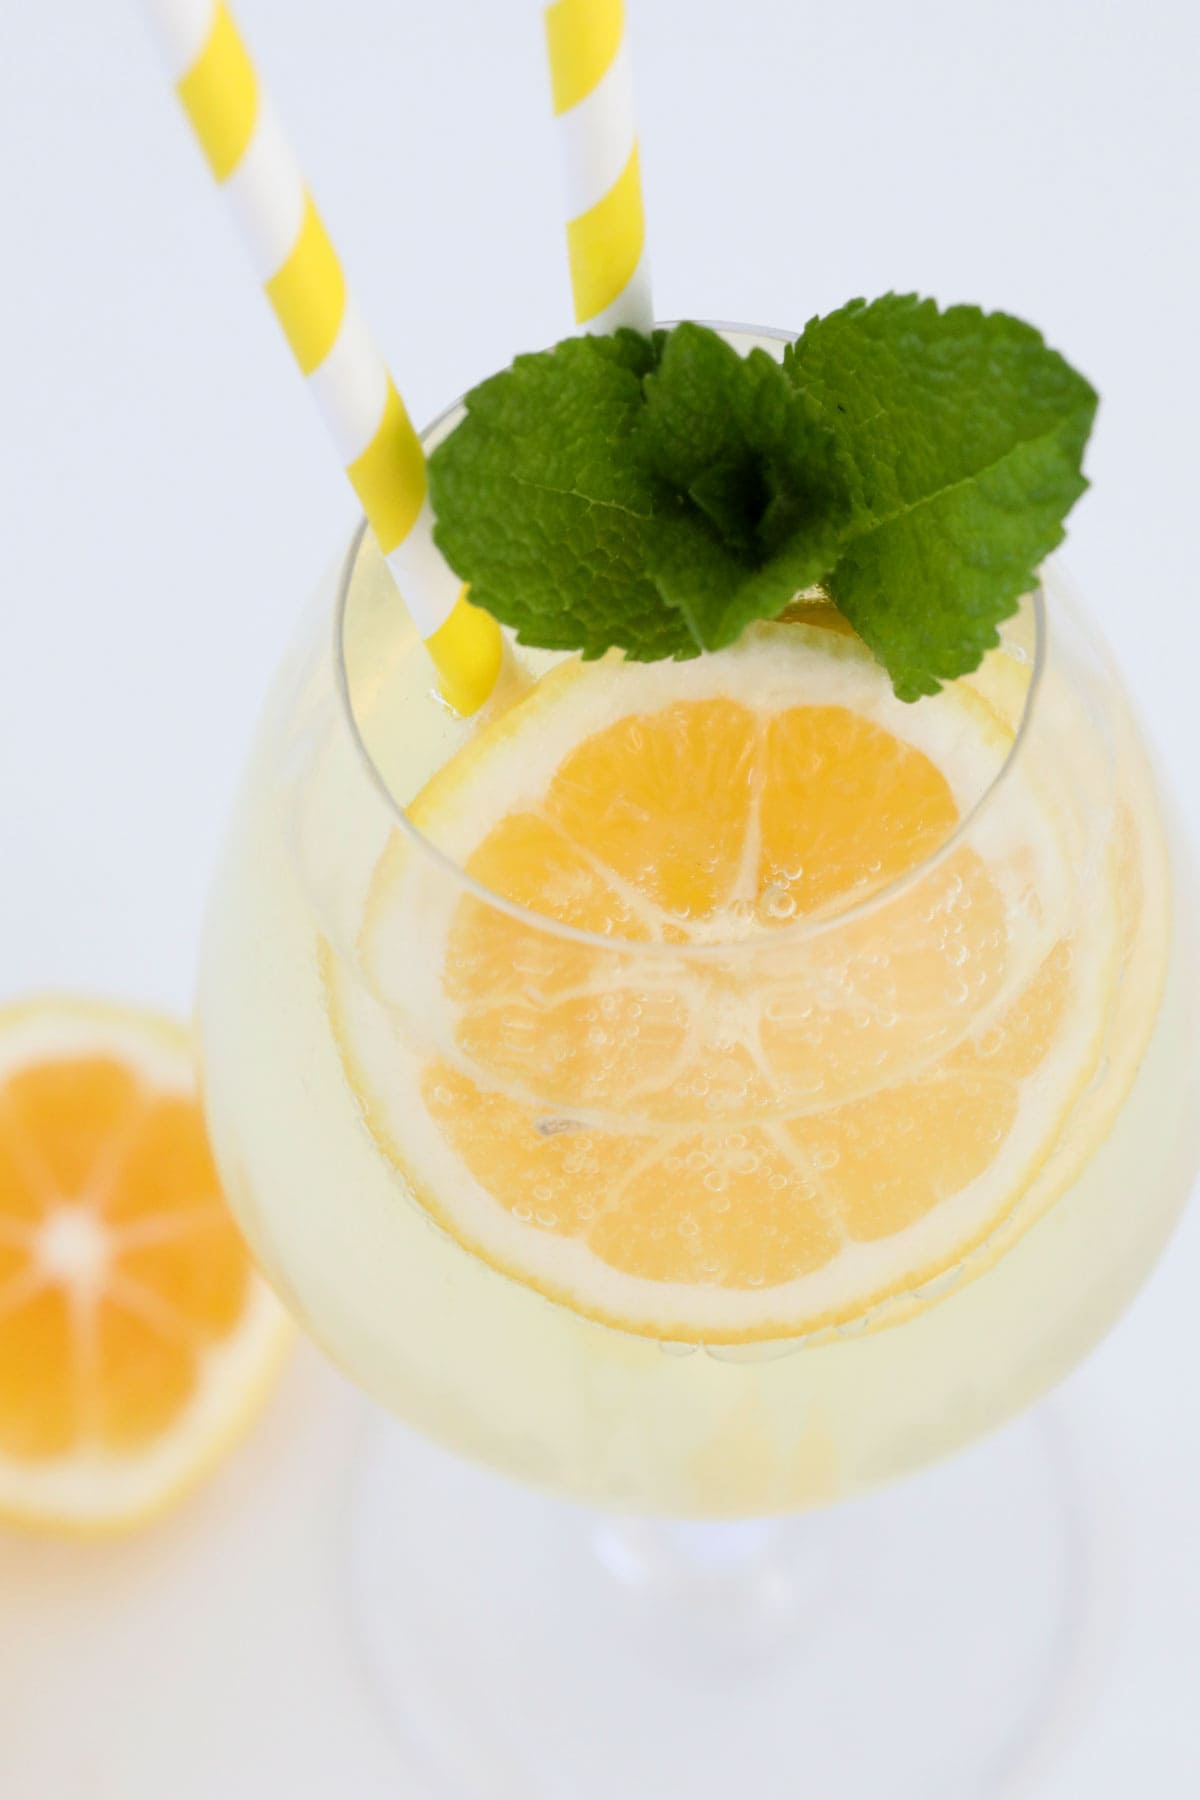 A glass of limoncello spritz served with fresh mint, lemon slices and two straws.